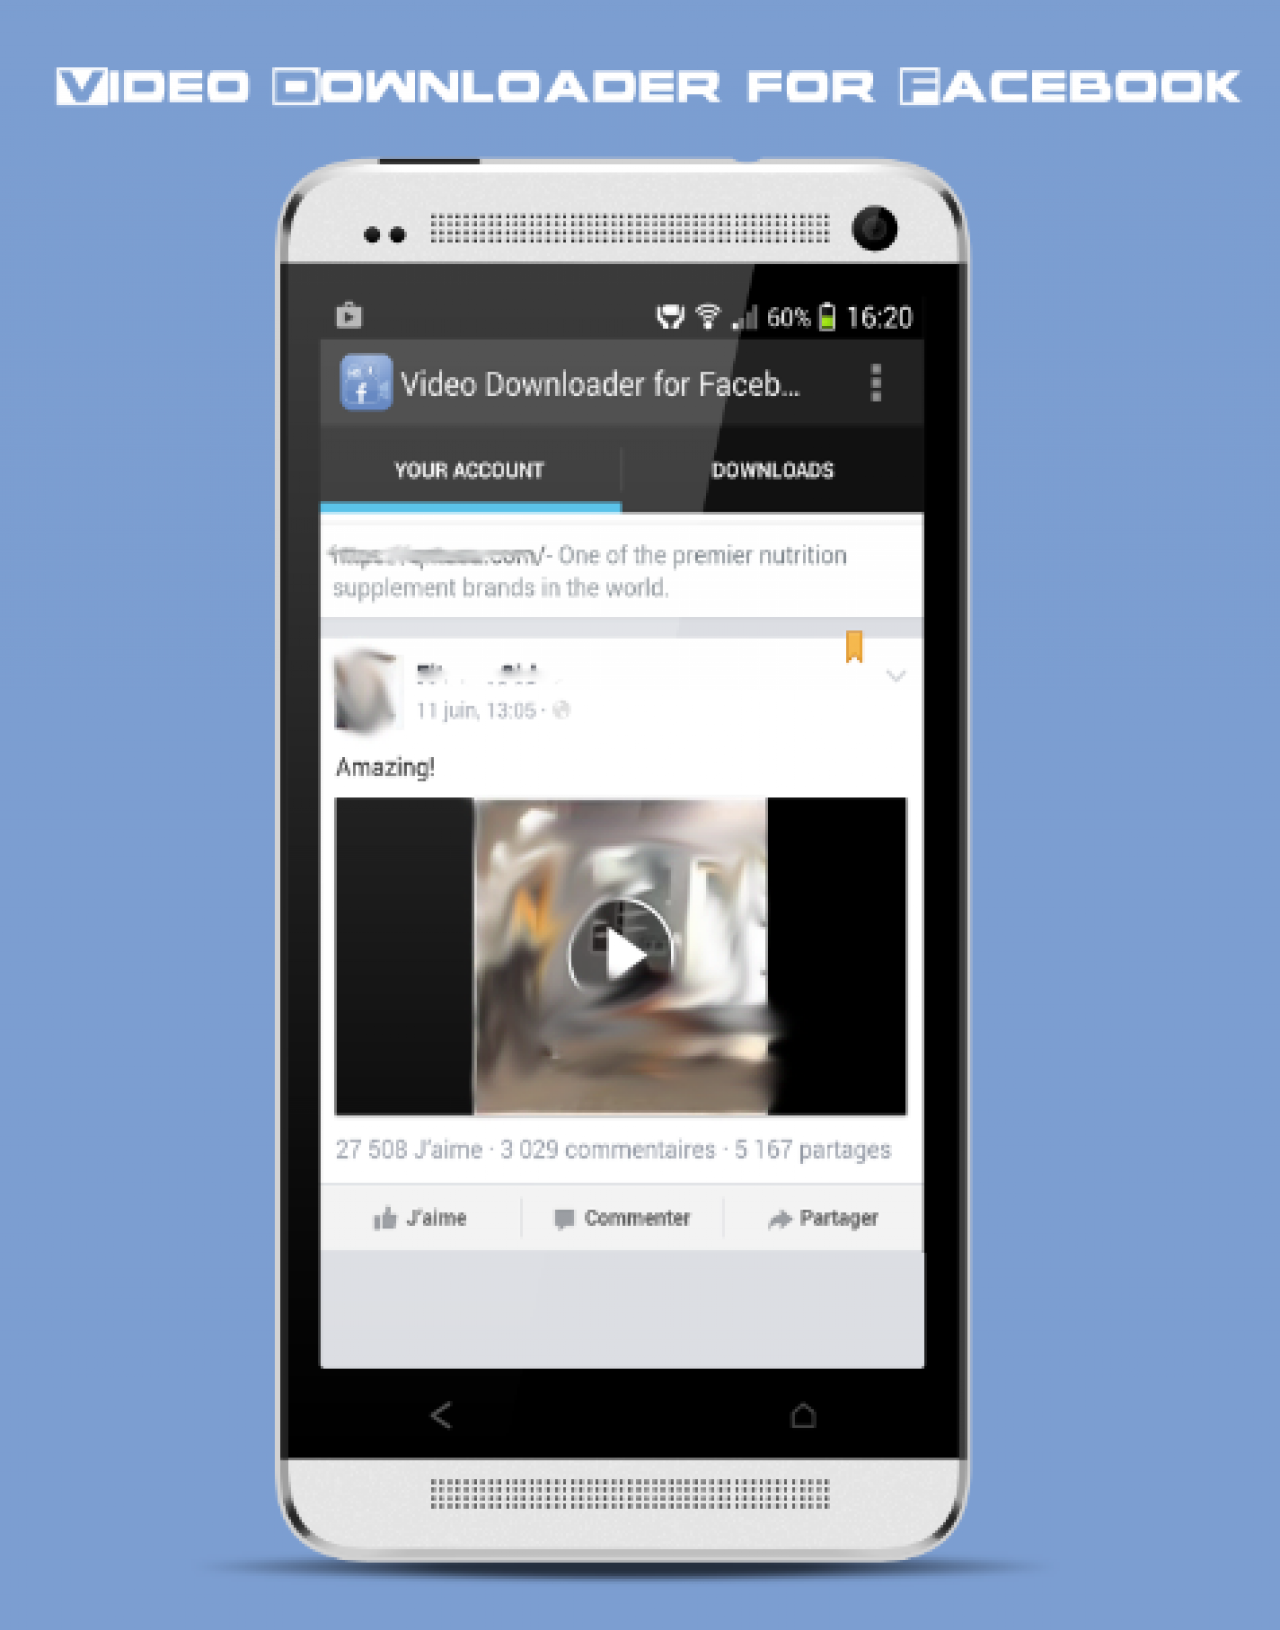 Facebook video downloader for android phones